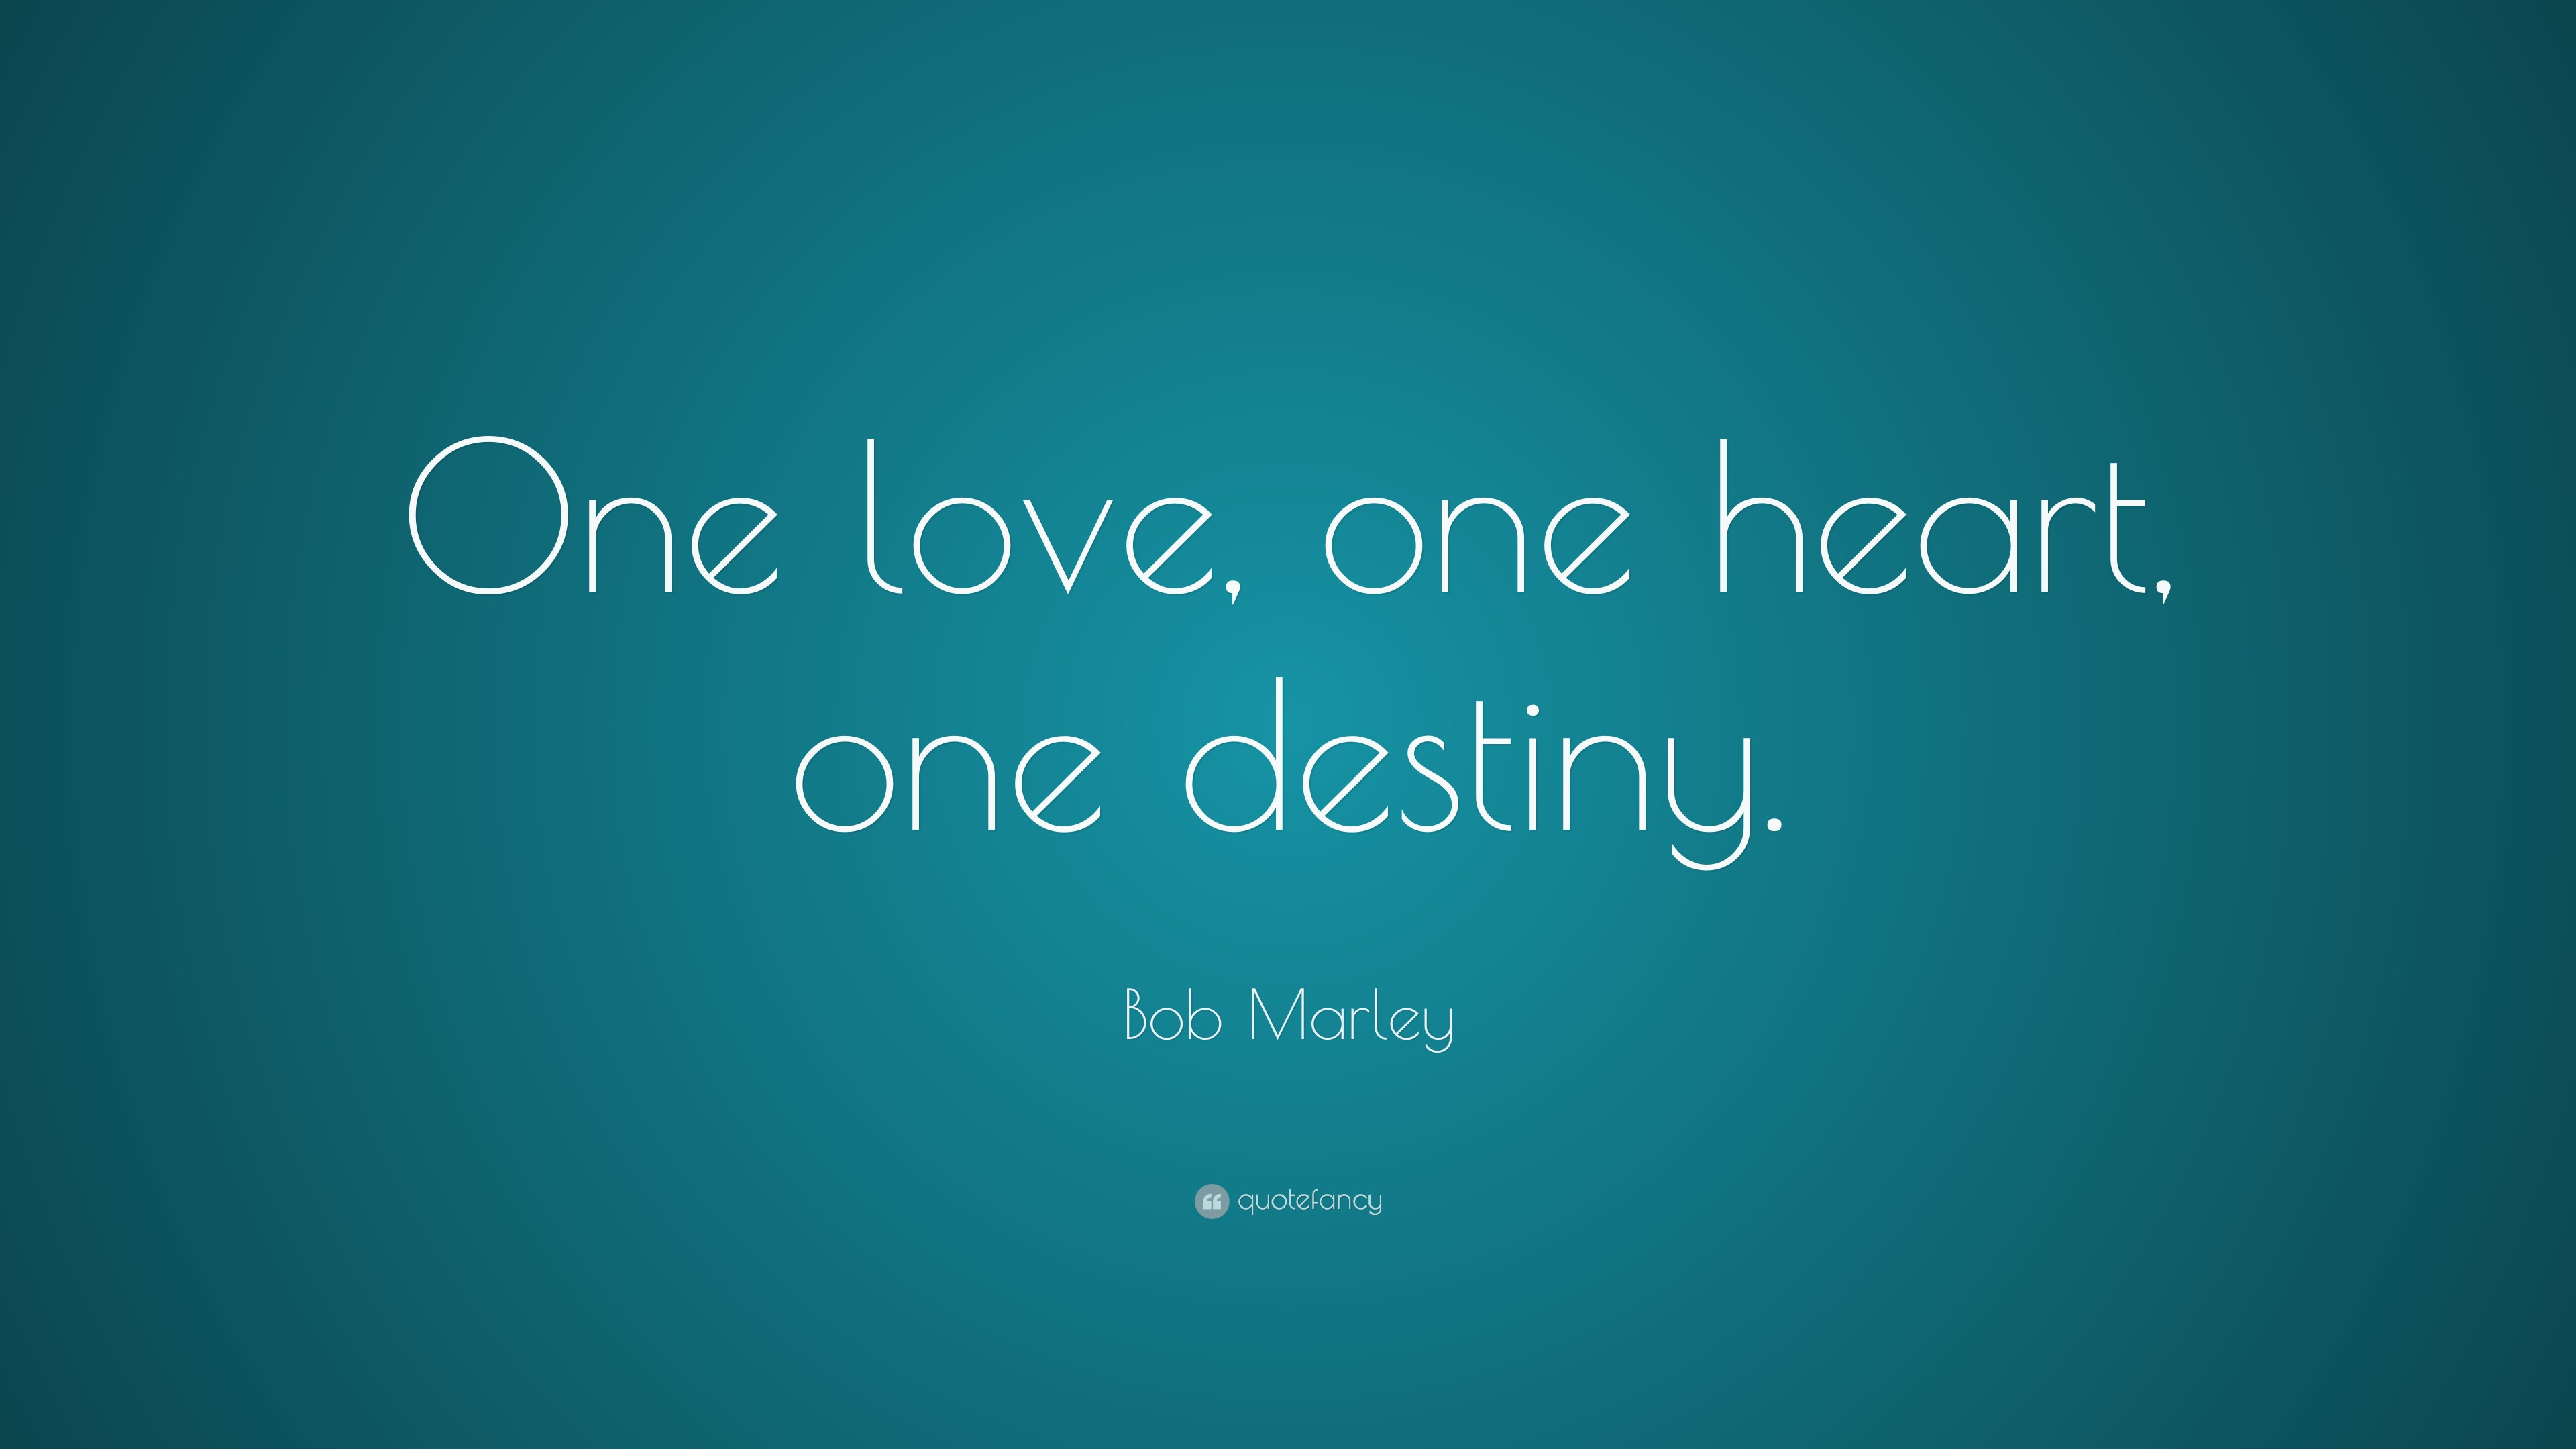 3840x2160 ... Bob Marley Quotes One Love One Heart Bob Marley Quote “One Love, ...